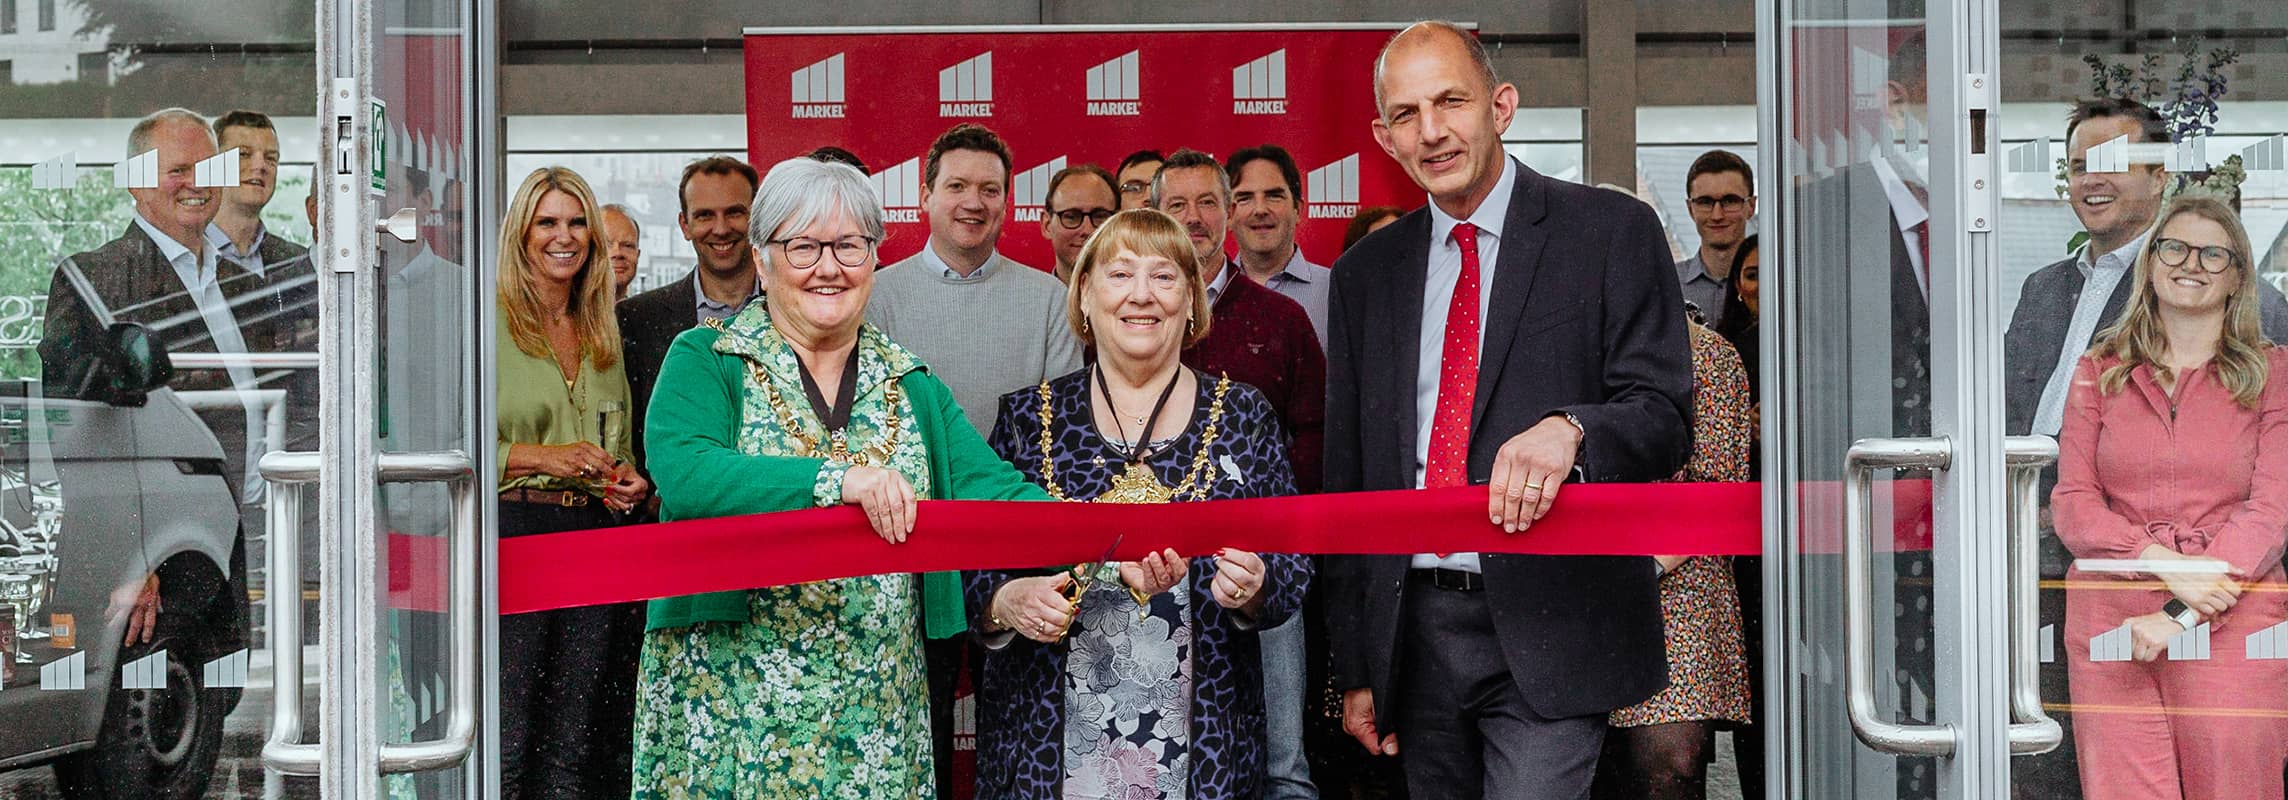 women cutting ribbon at office party in sheffield